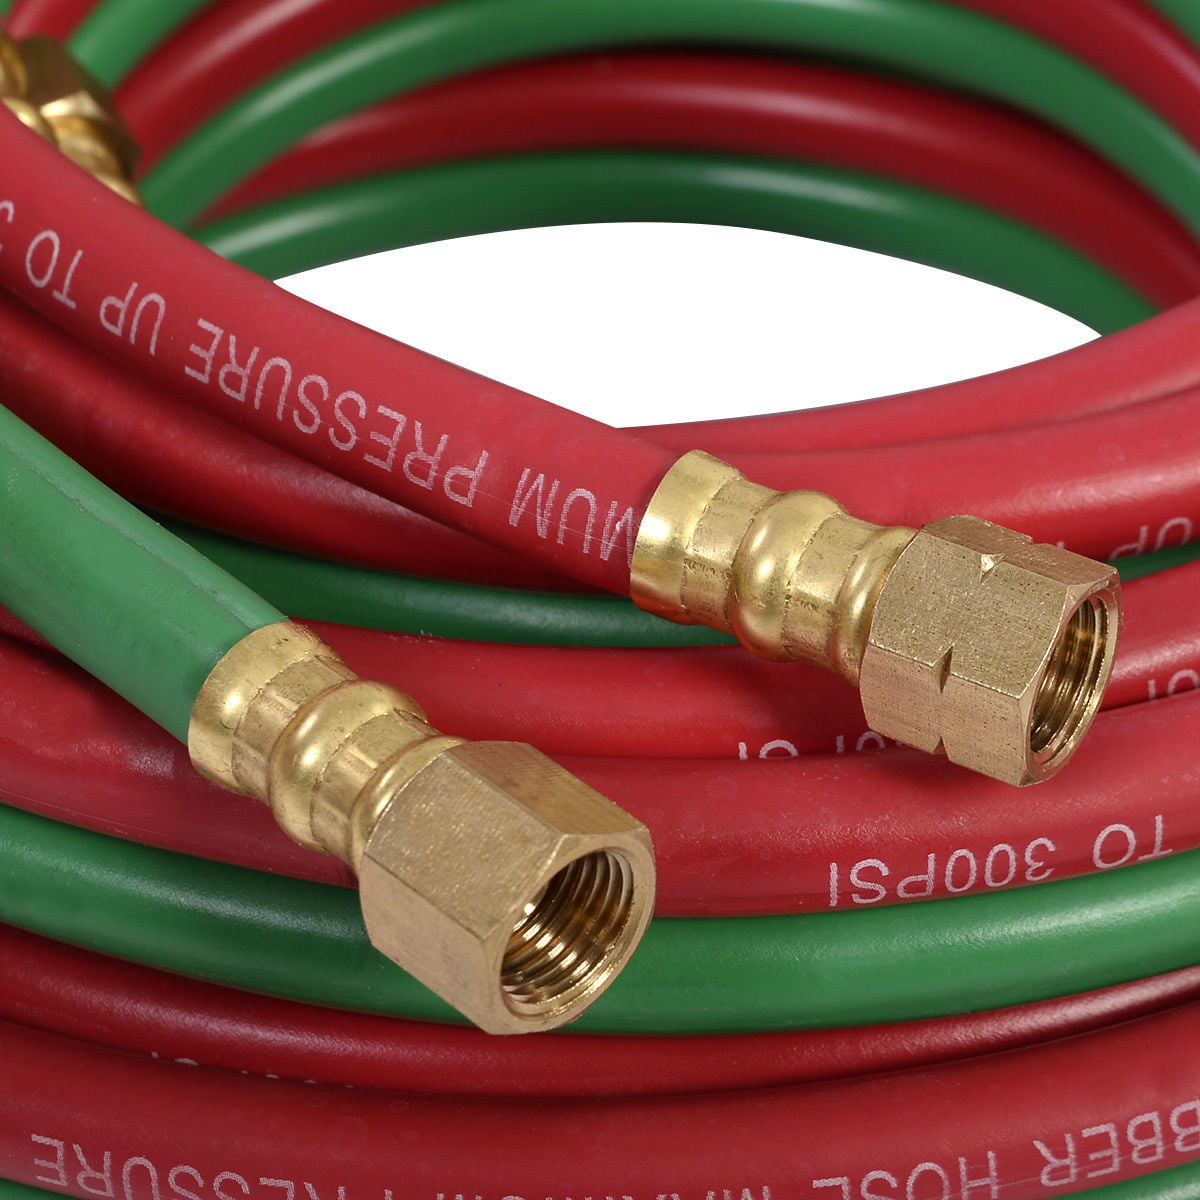 50ft 50ft Twin Welding Torch Hose Oxy Acetylene Oxygen Cutting 300PSI Industrial Red & Green NEW 